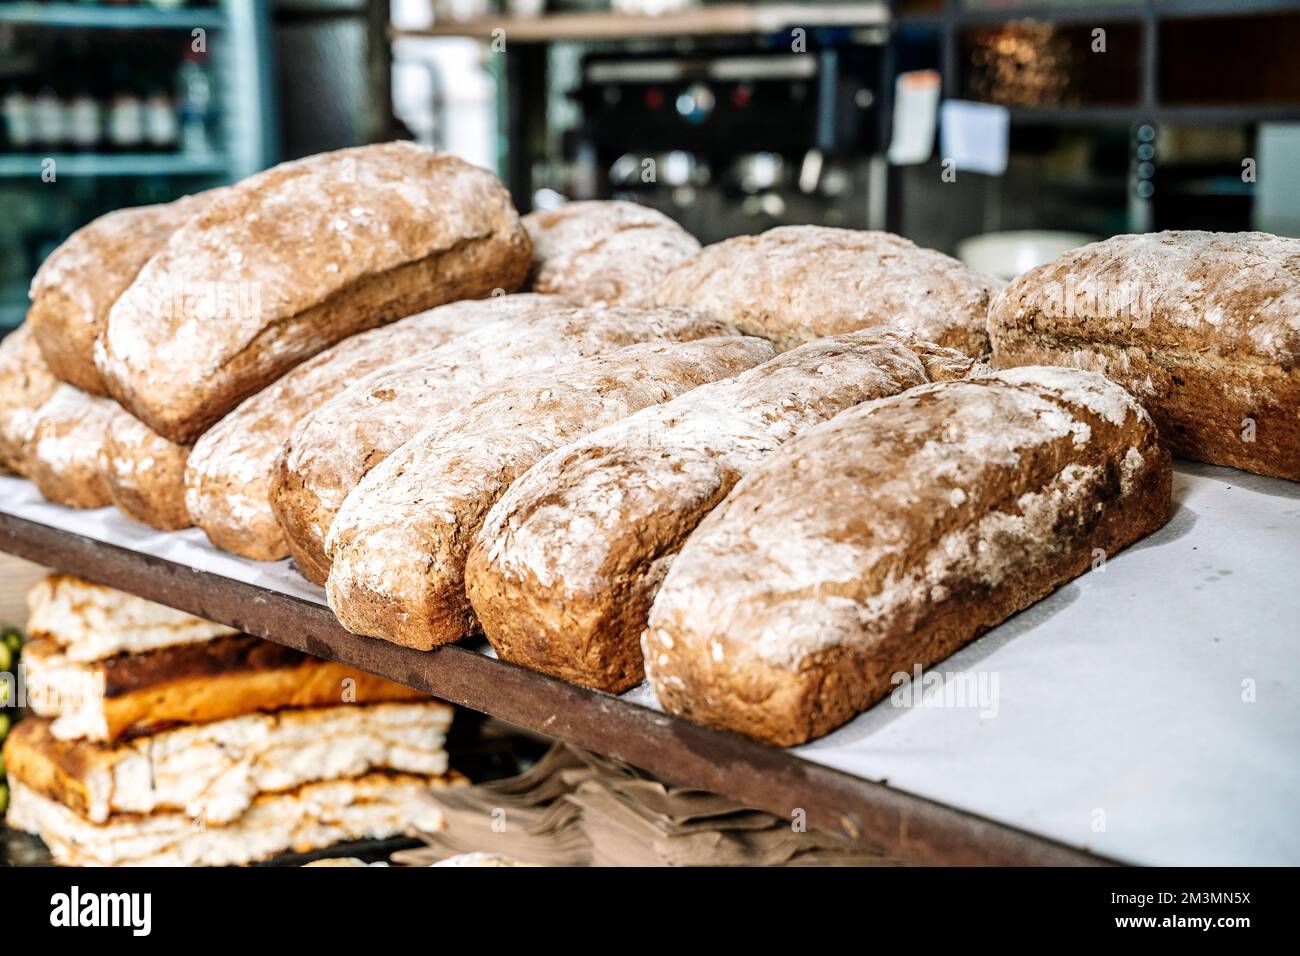 Loaves of bread on the shelves of the shop bakery counter. Fresh, homemade wheat and whole grain breads and pastries. High quality photo Stock Photo